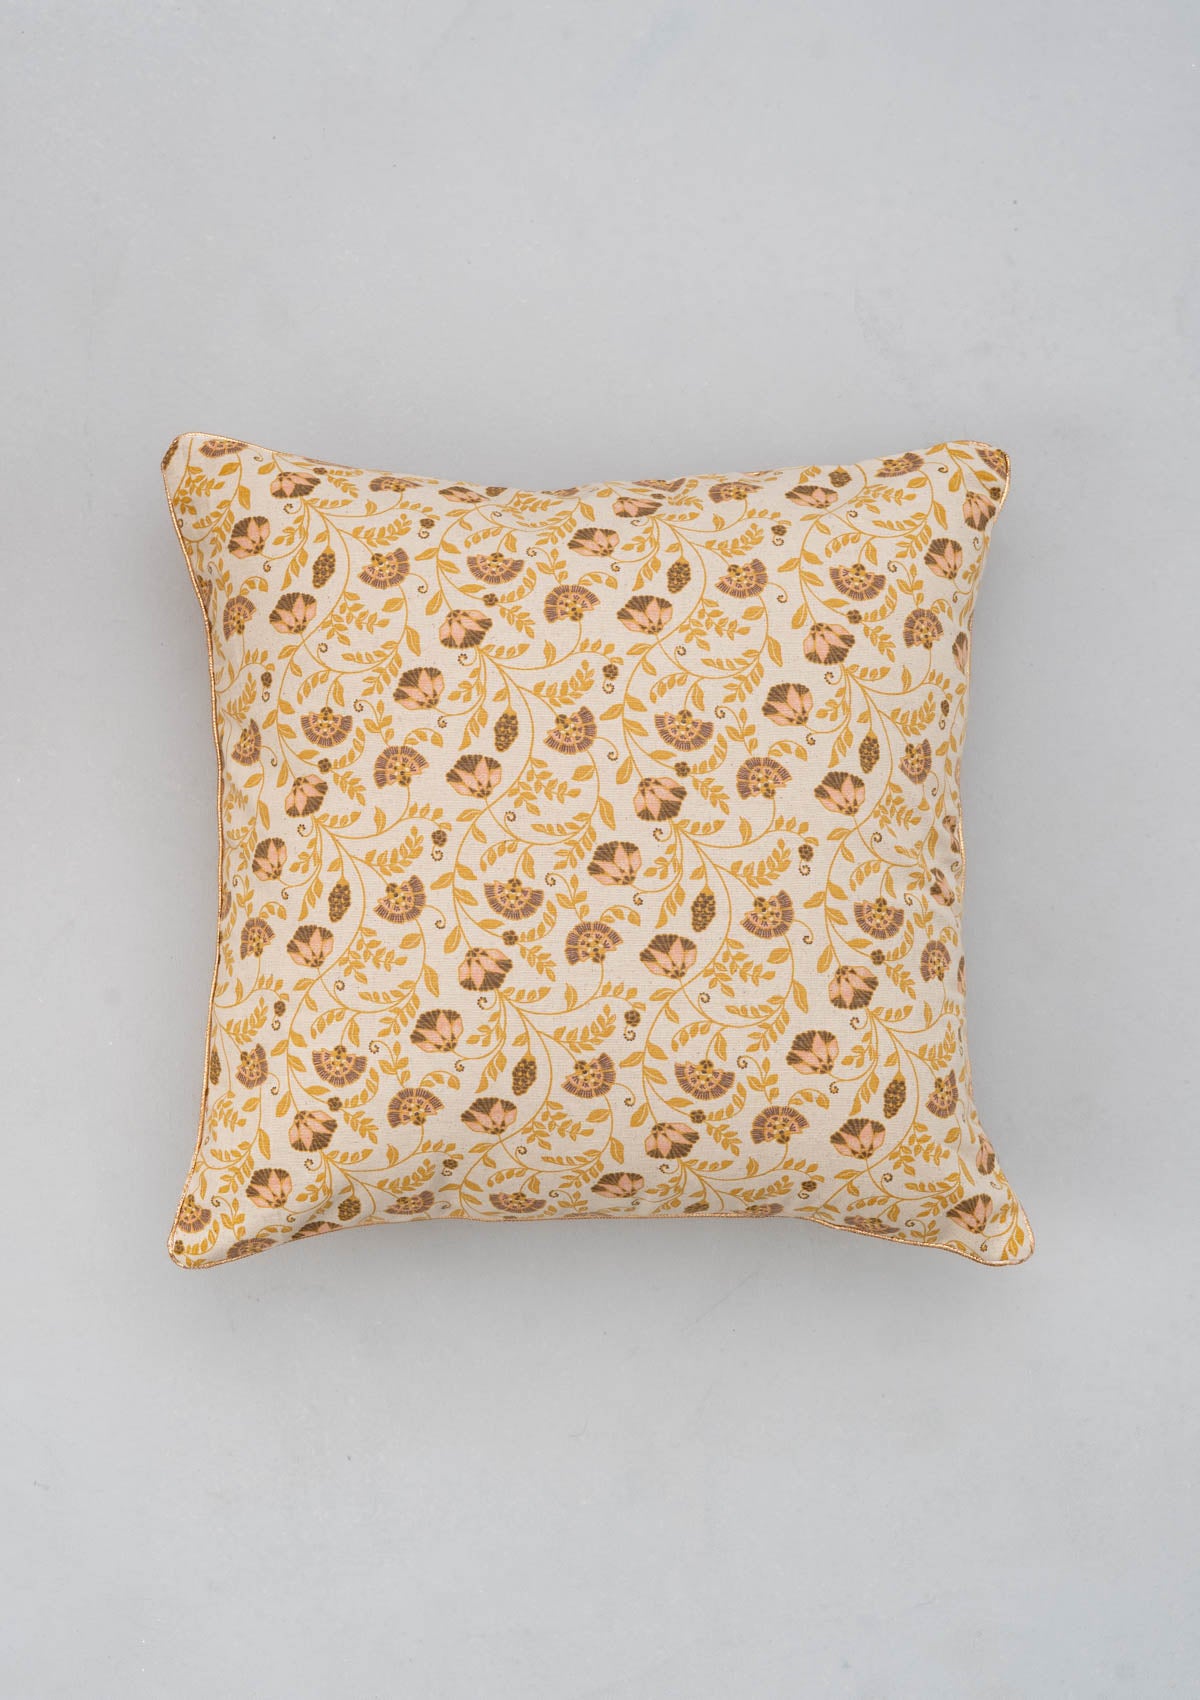 Calico Printed Cotton Cushion Cover - Amber